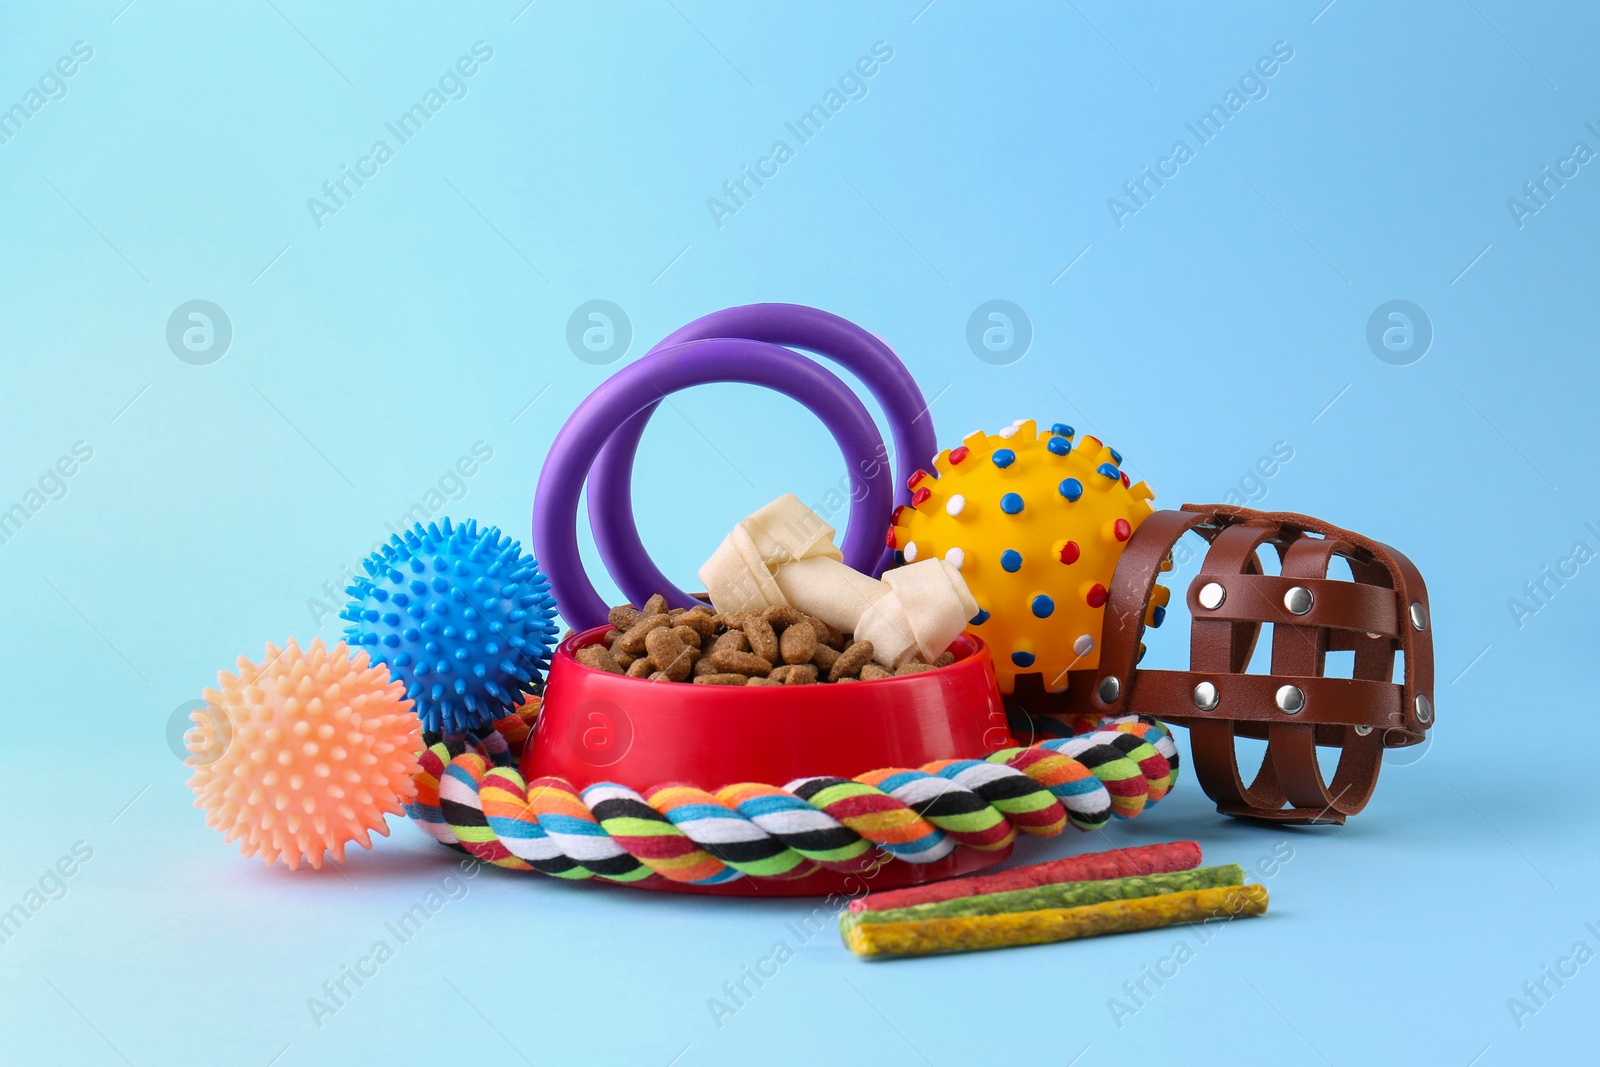 Photo of Dry pet food, toys and other goods on light blue background. Shop items